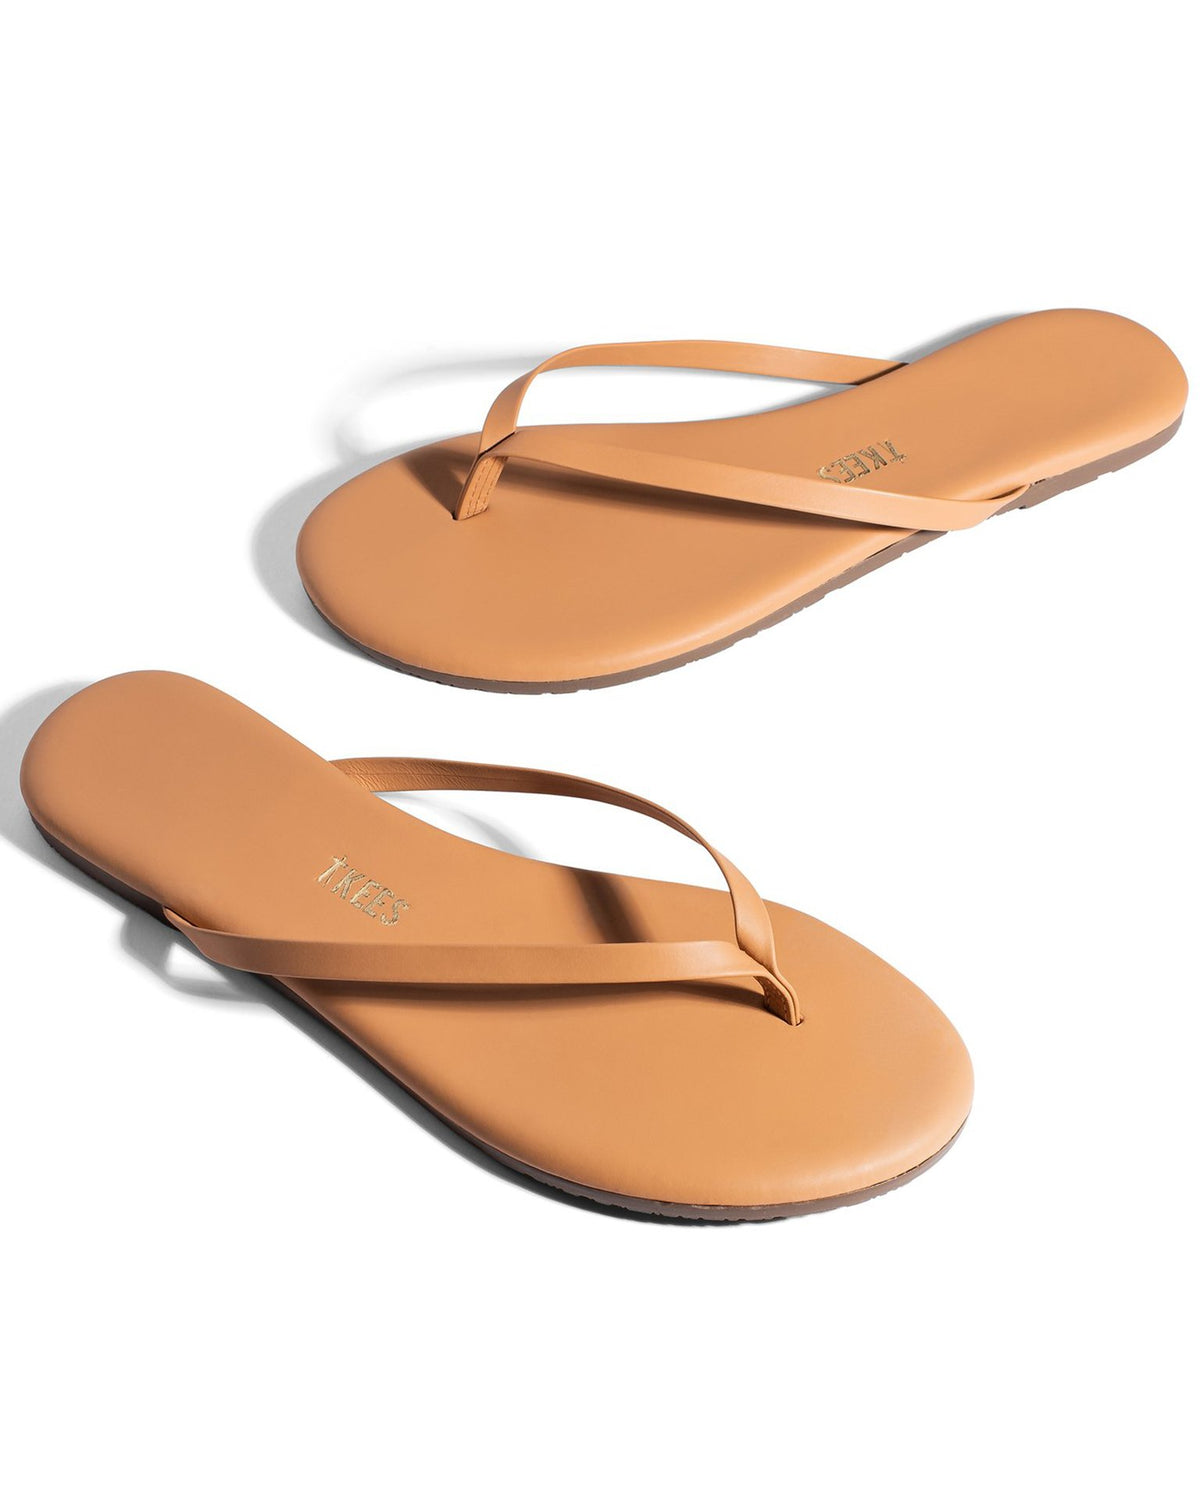 Tkees Shoes Nudes Flip Flop in Sunbliss